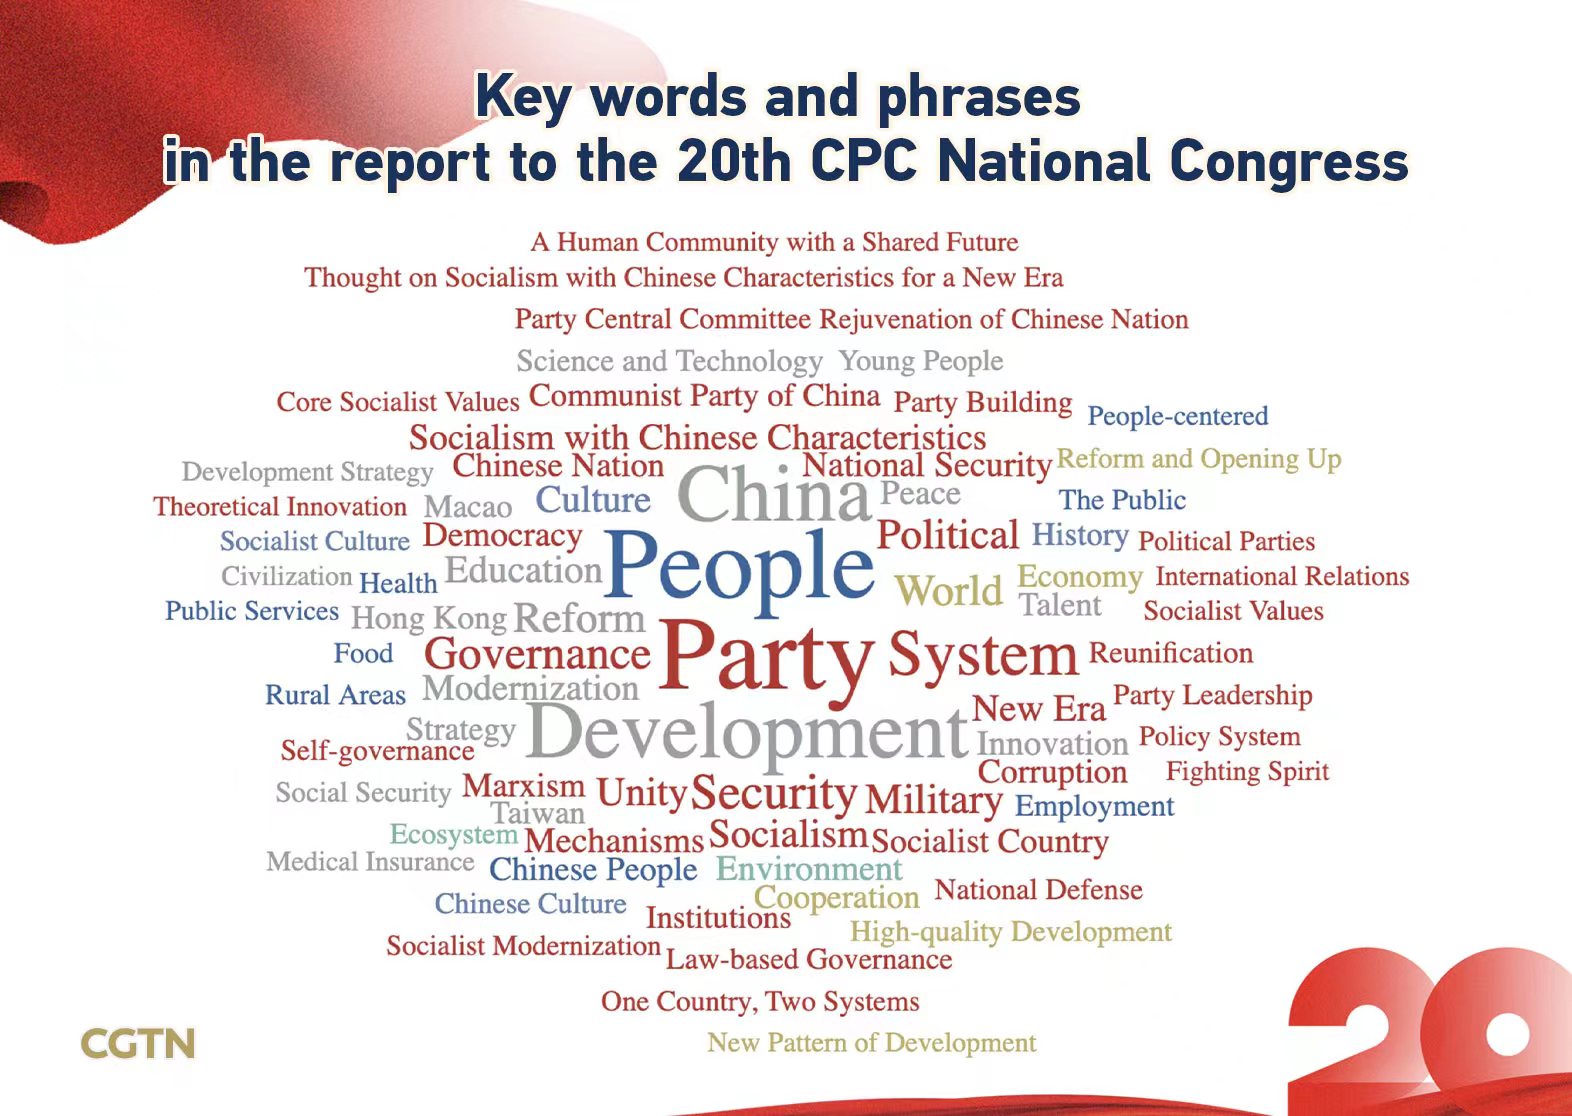 Graphics: Five takeaways from the report to 20th CPC National Congress